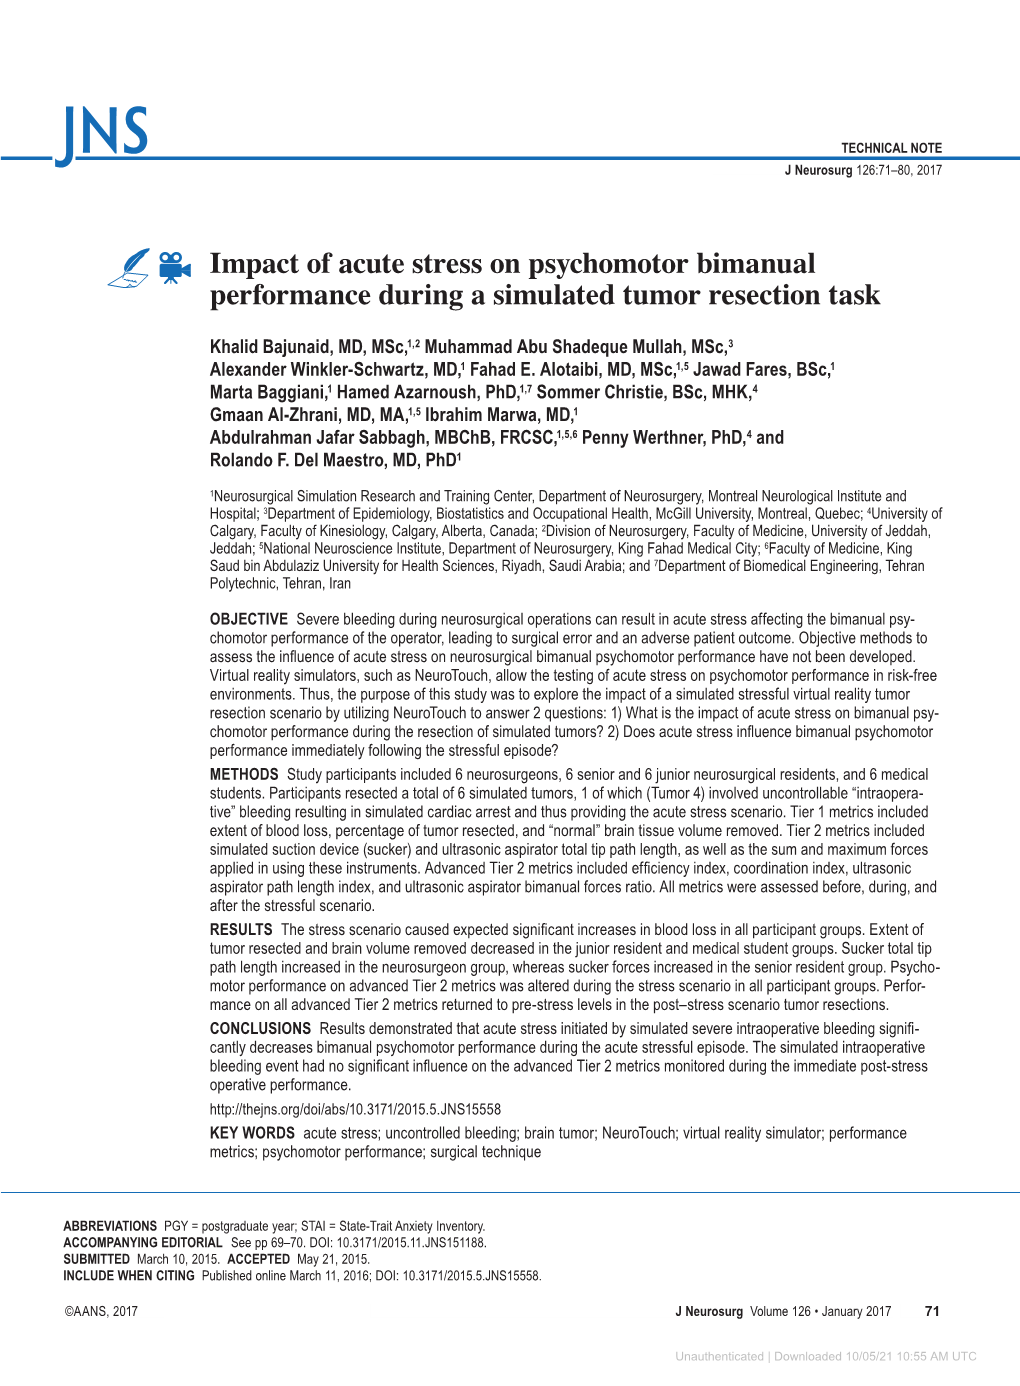 Impact of Acute Stress on Psychomotor Bimanual Performance During a Simulated Tumor Resection Task